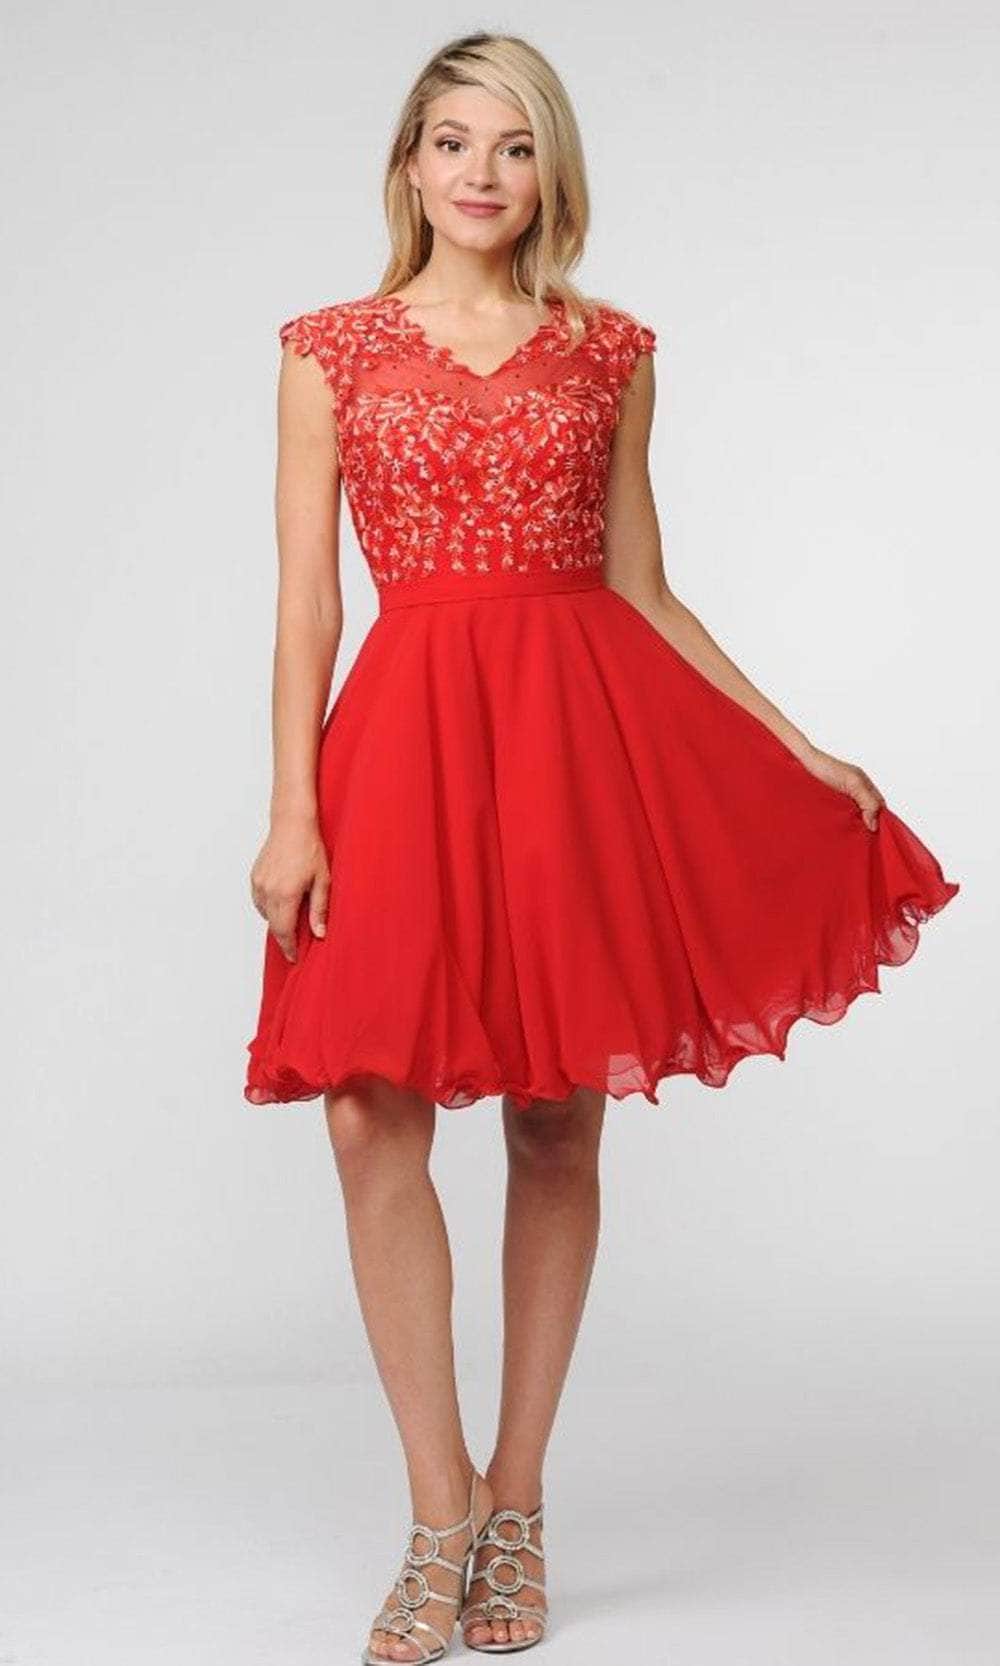 Poly USA 8094 - Scoop Neck Short Sleeve Cocktail Dress Cocktail Dresses XS / Red